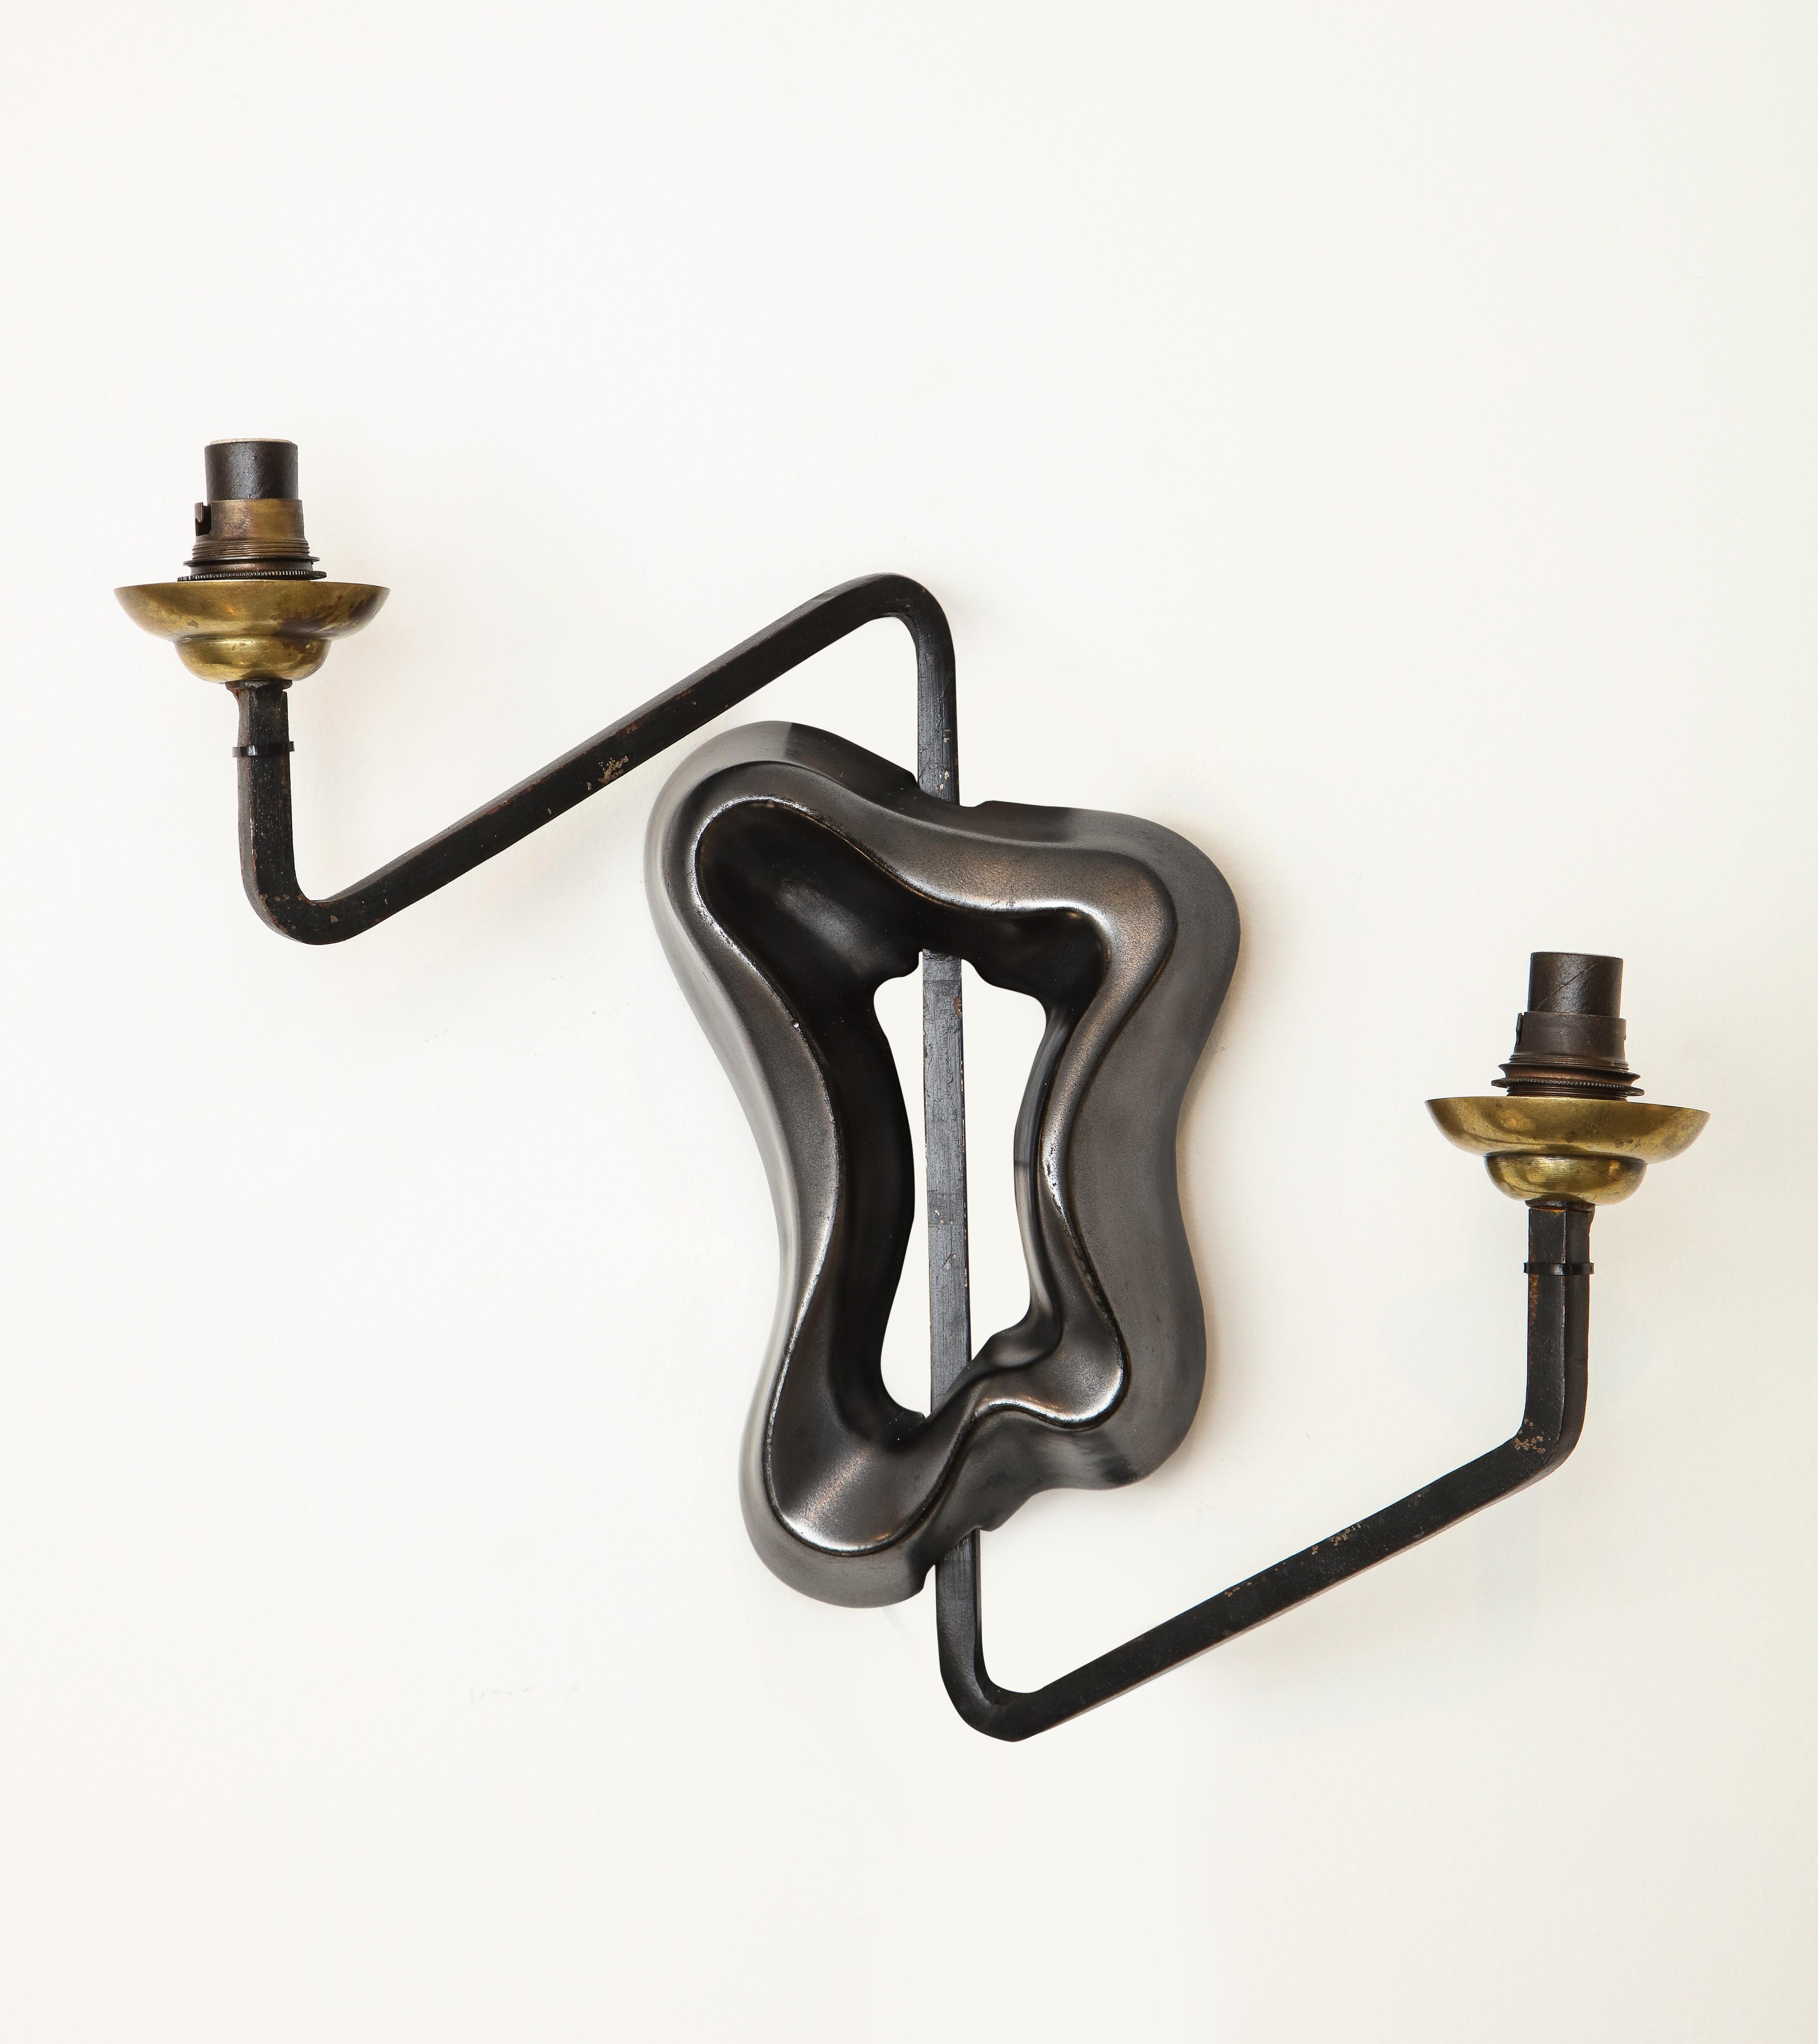 George Jouve sconces, Edition Marcel Asselbur, circa 1950s (not later editions)
Ceramic, Iron, Brass
Measures: H 13, W 13.75, D: 4.75 in.

rewired.